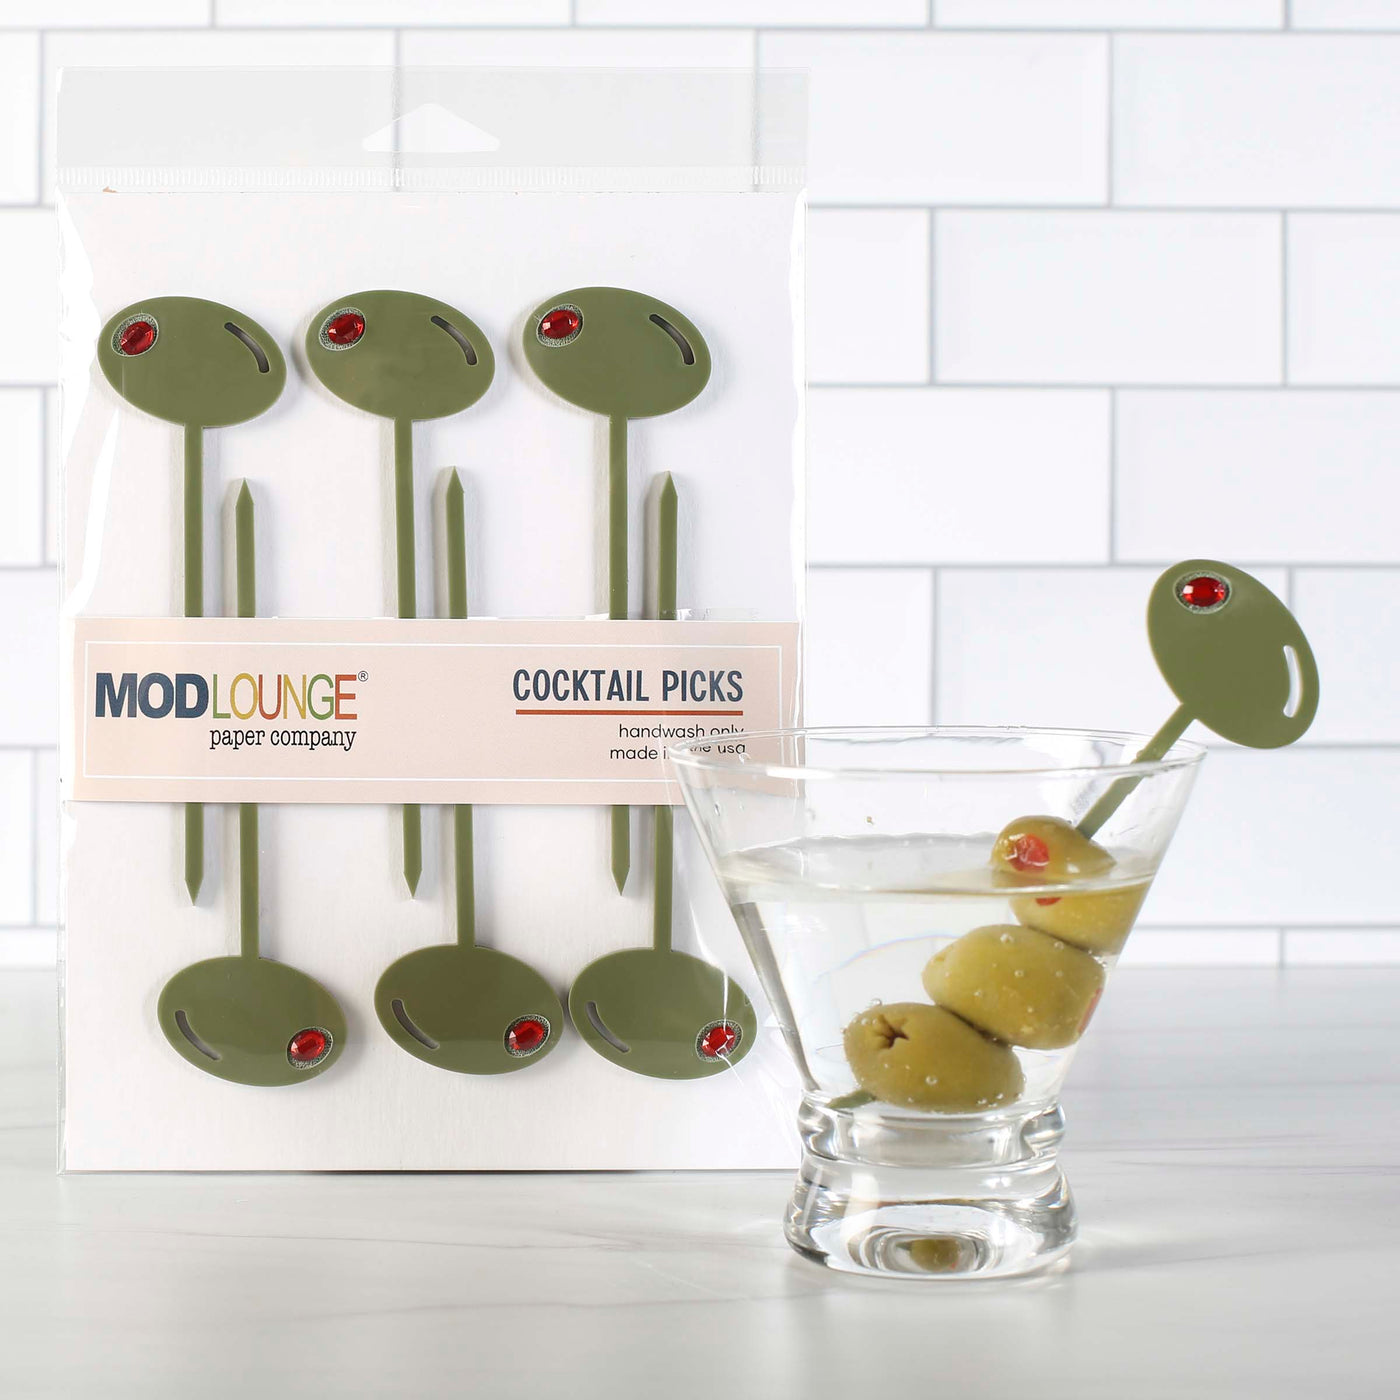 An elegant look with an affordable price. These Mid Century Modern inspired olive green acrylic cocktail pick set will make a classy statement on any bar. red Rhinestone "pit" accent adds a bit of glam. Makes a great gift for Housewarming, Newlyweds and Birthdays.